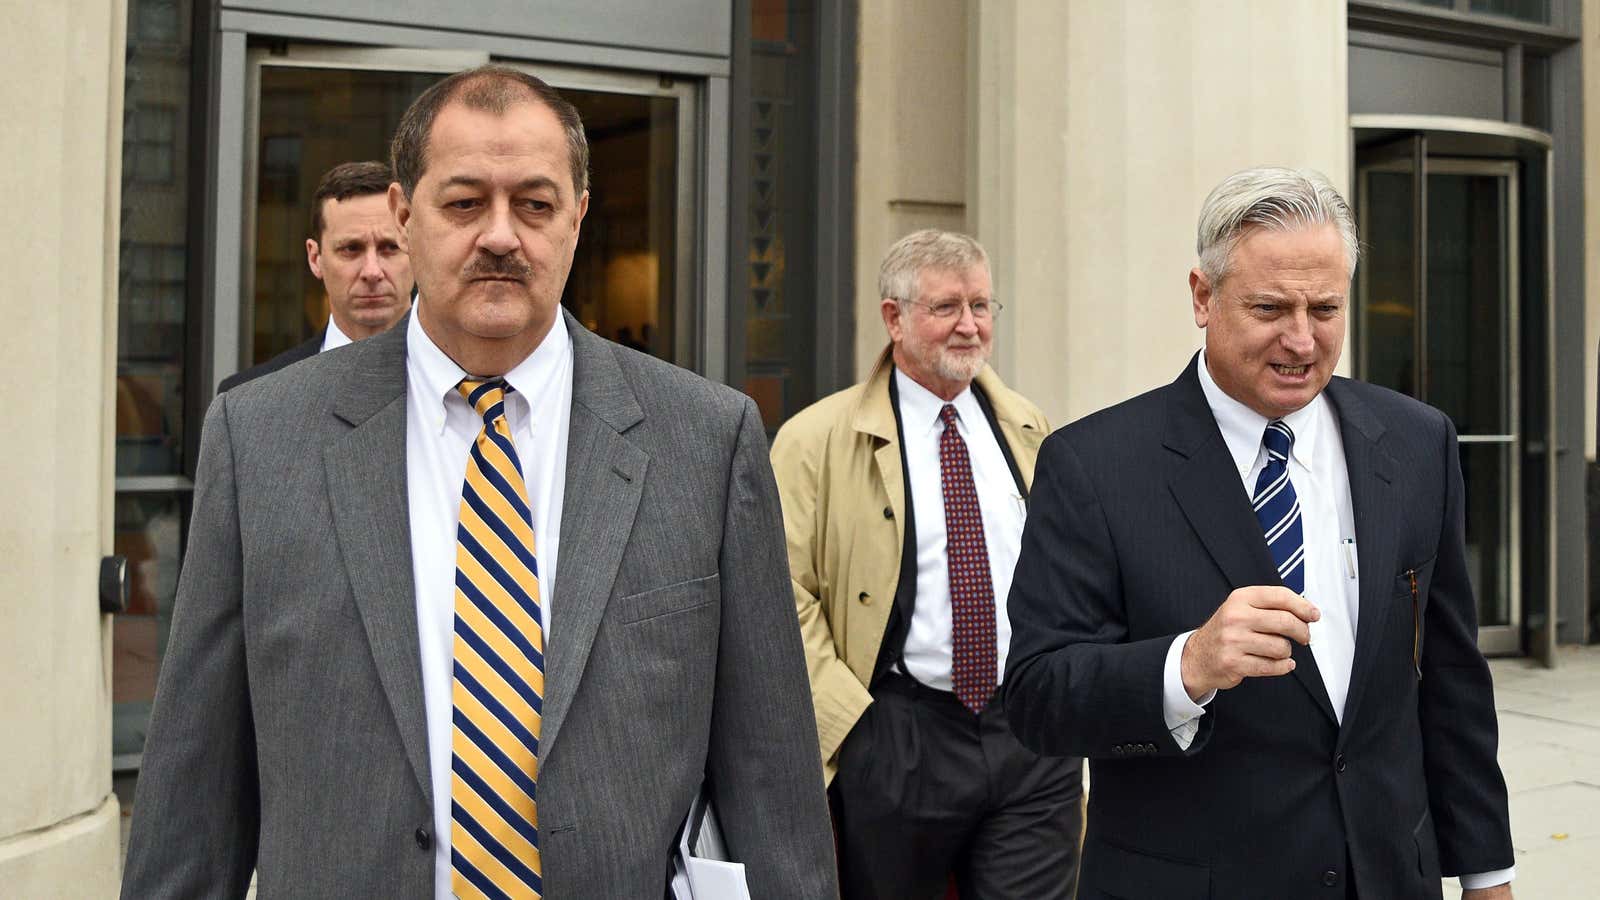 Don Blankenship will need his probation officer’s permission to campaign in West Virginia.